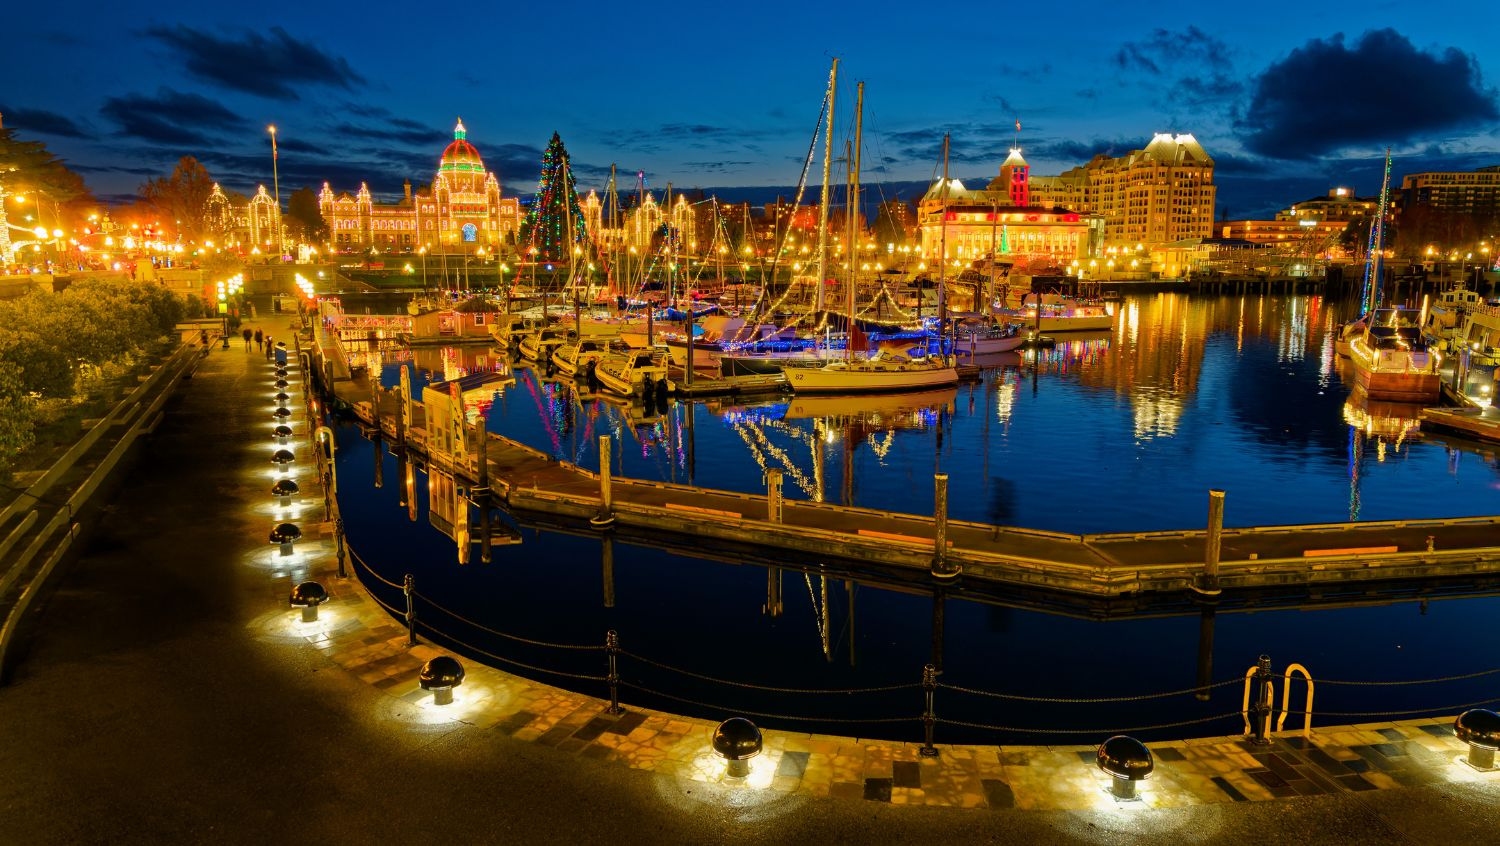 Victoria Harbour is a must-see when you travel solo on Vancouver Island